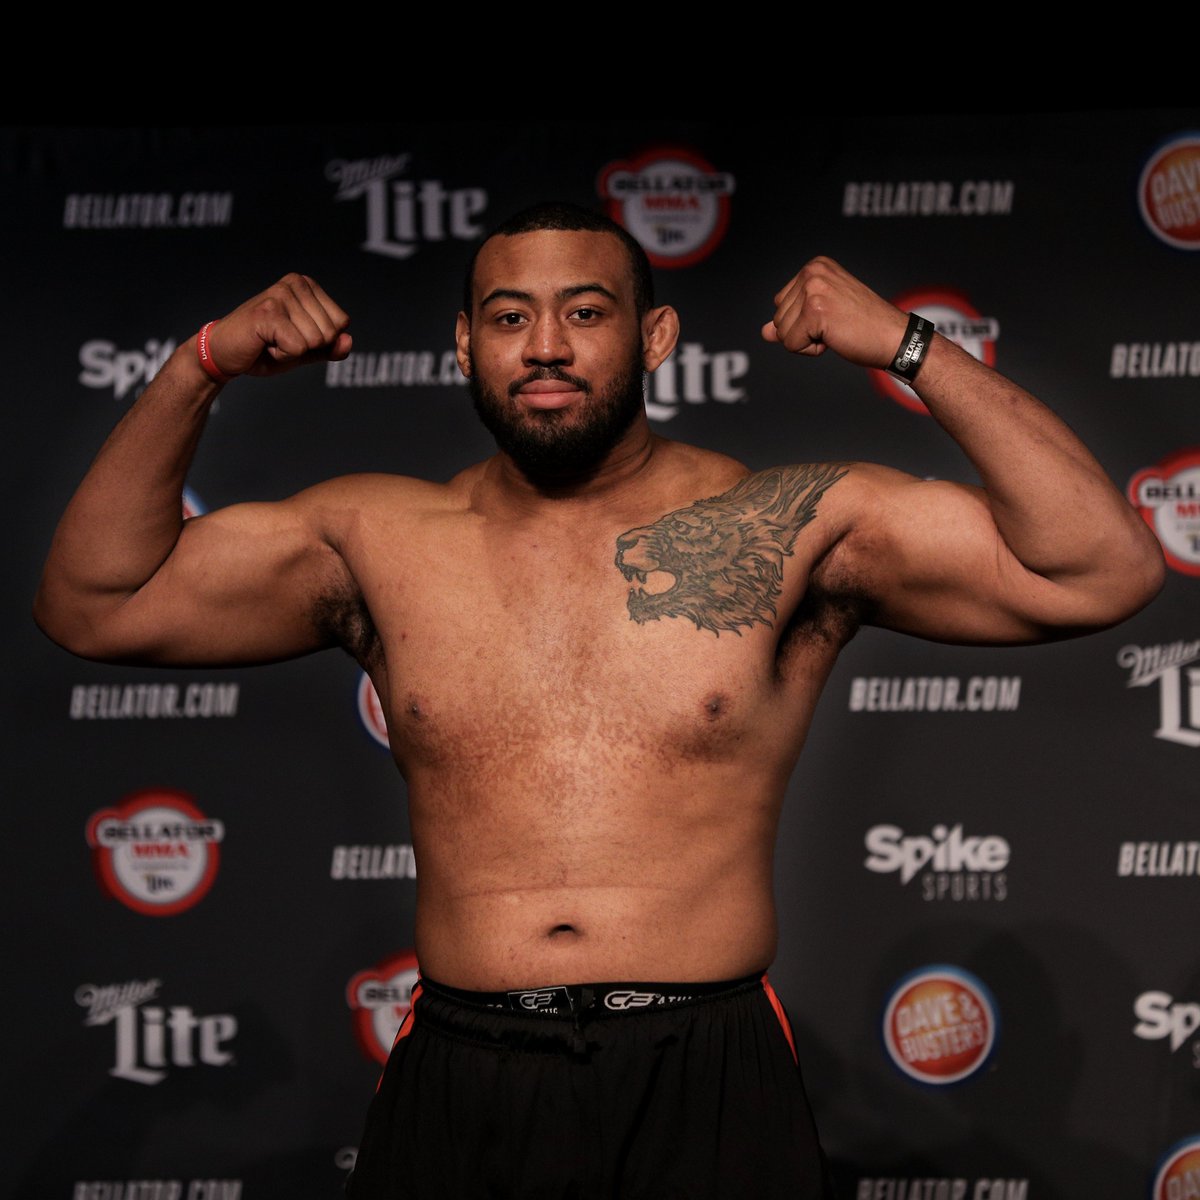  Bellator 202: Budd vs. Nogueira - July 13 (OFFICIAL DISCUSSION)  DhsKyrLVMAALaWo